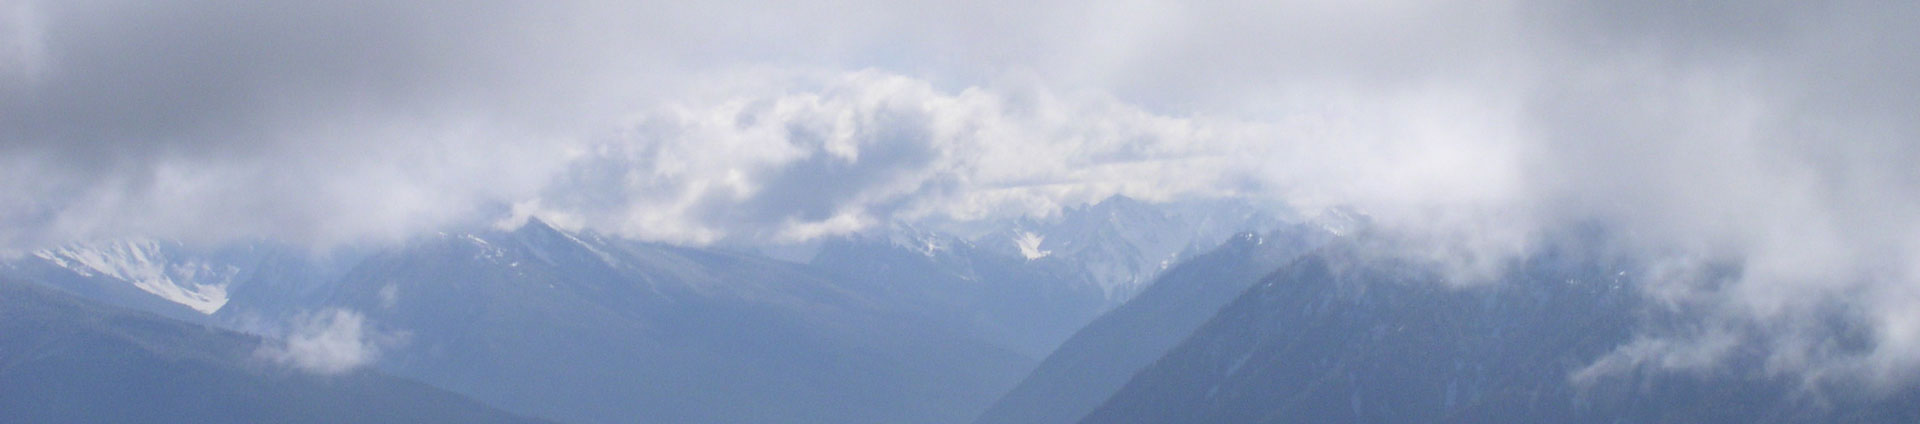 header image of olympic mountains in clouds